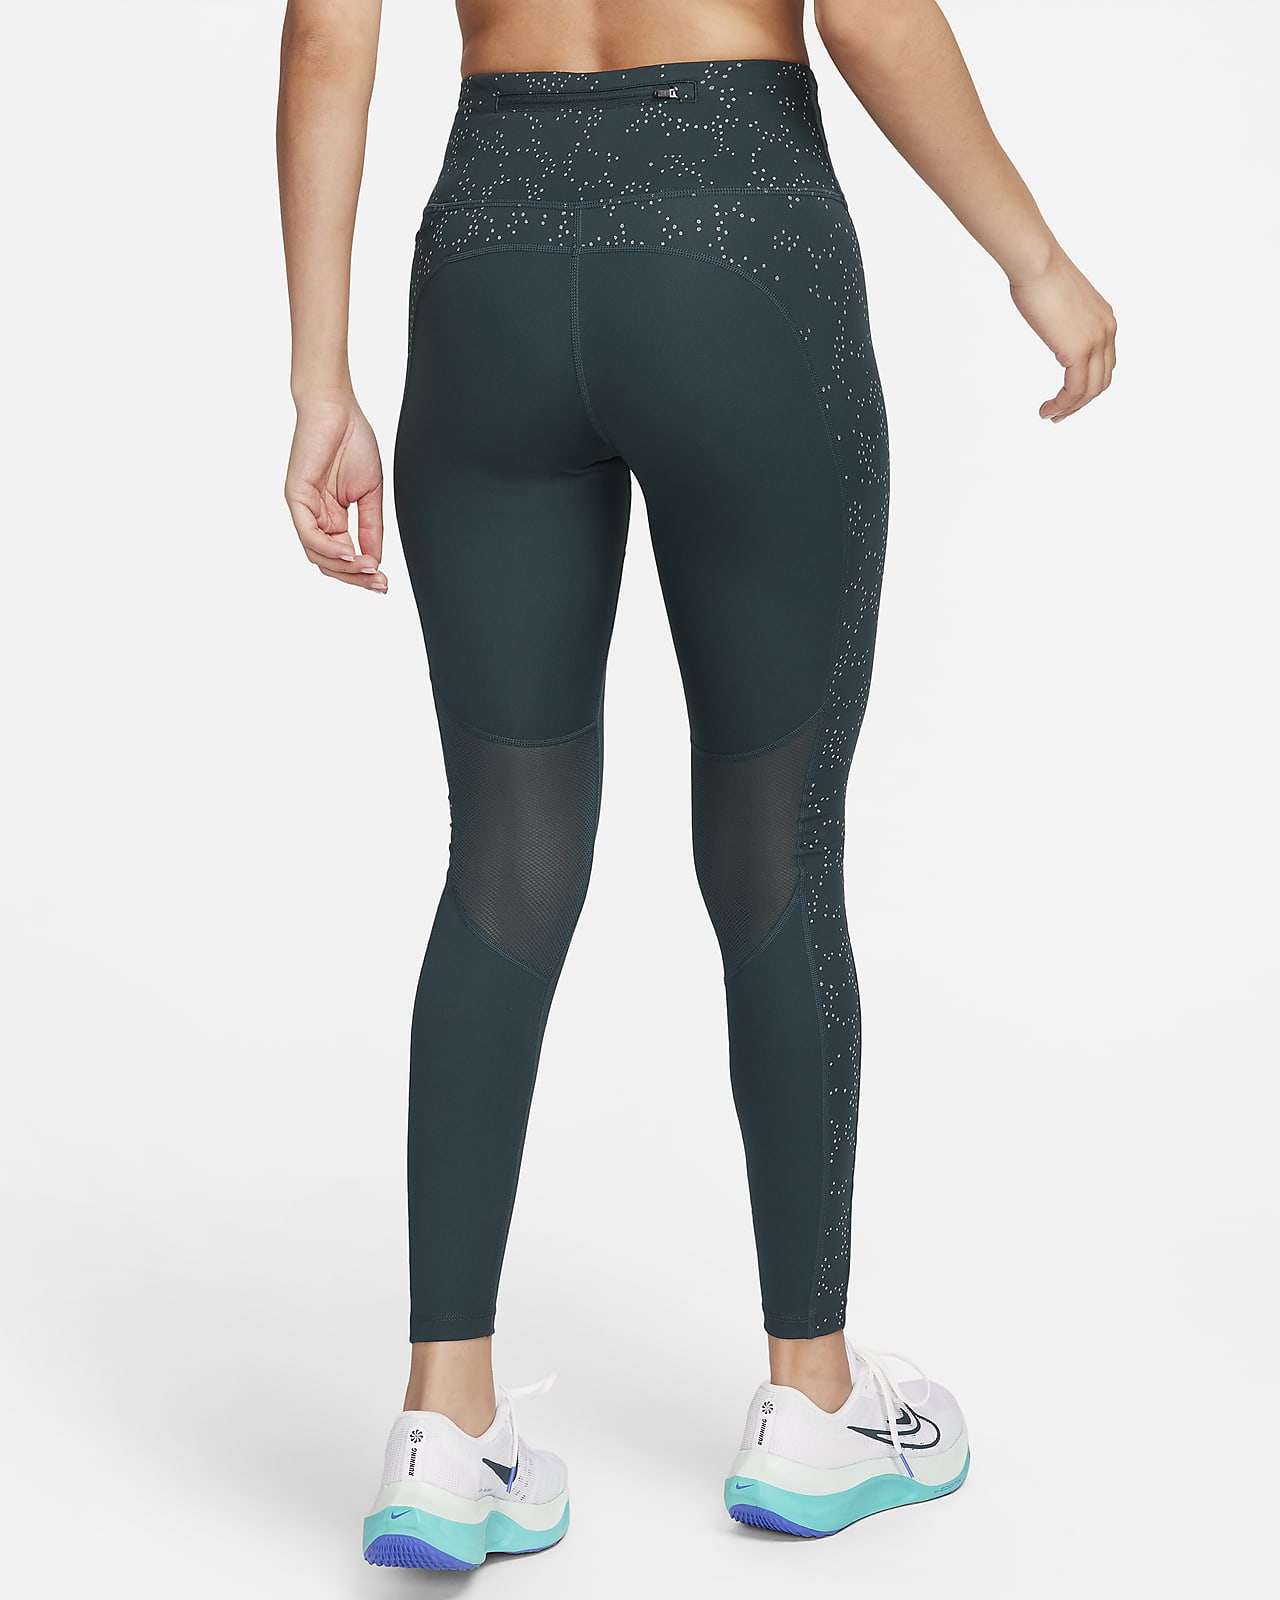 Shop Fast Women's Mid-Rise 7/8 Graphic Leggings with Pockets | Nike KSA